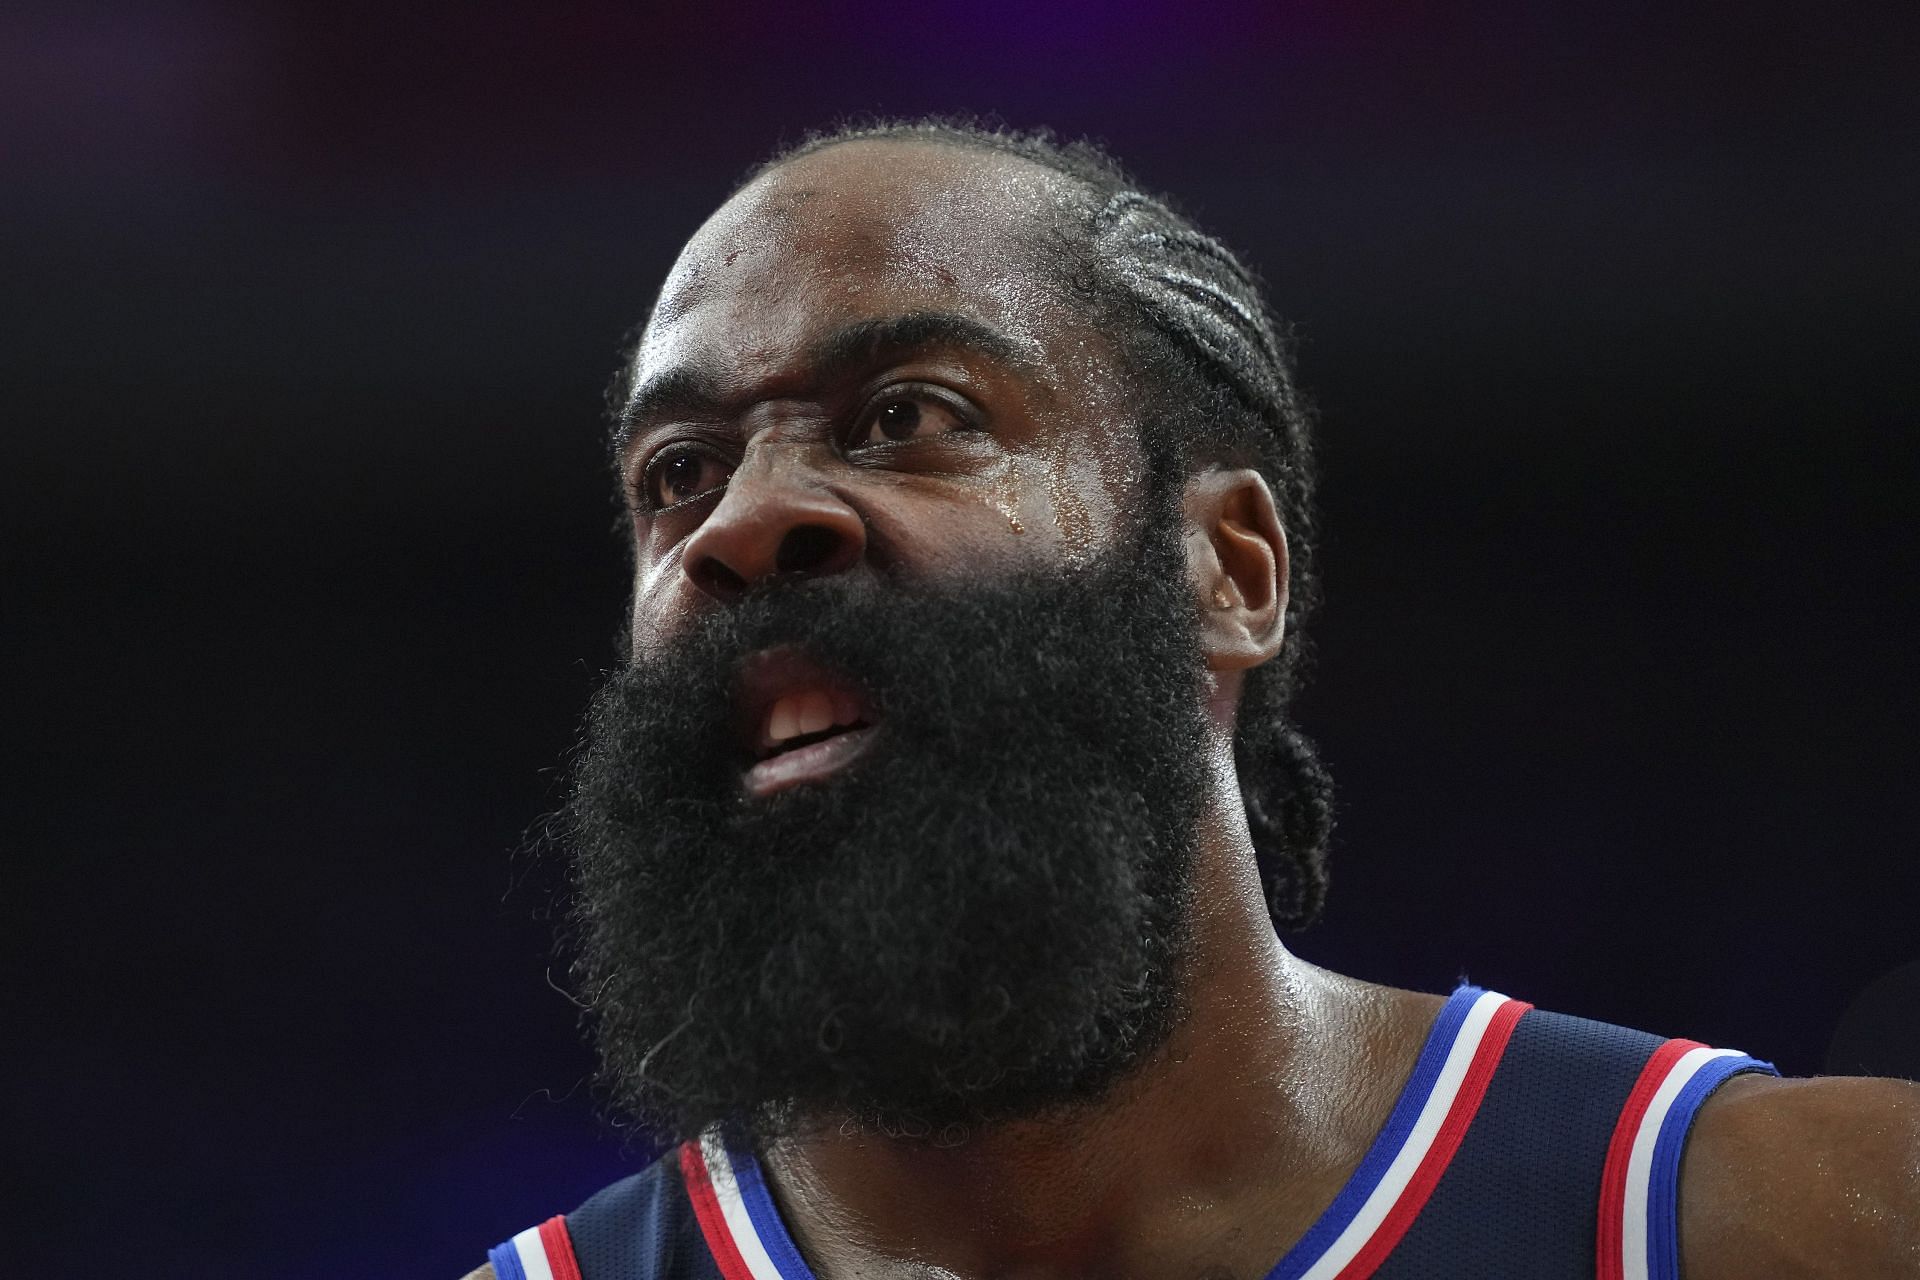 James Harden just had 11 points in the loss to the Brooklyn Nets on Thursday